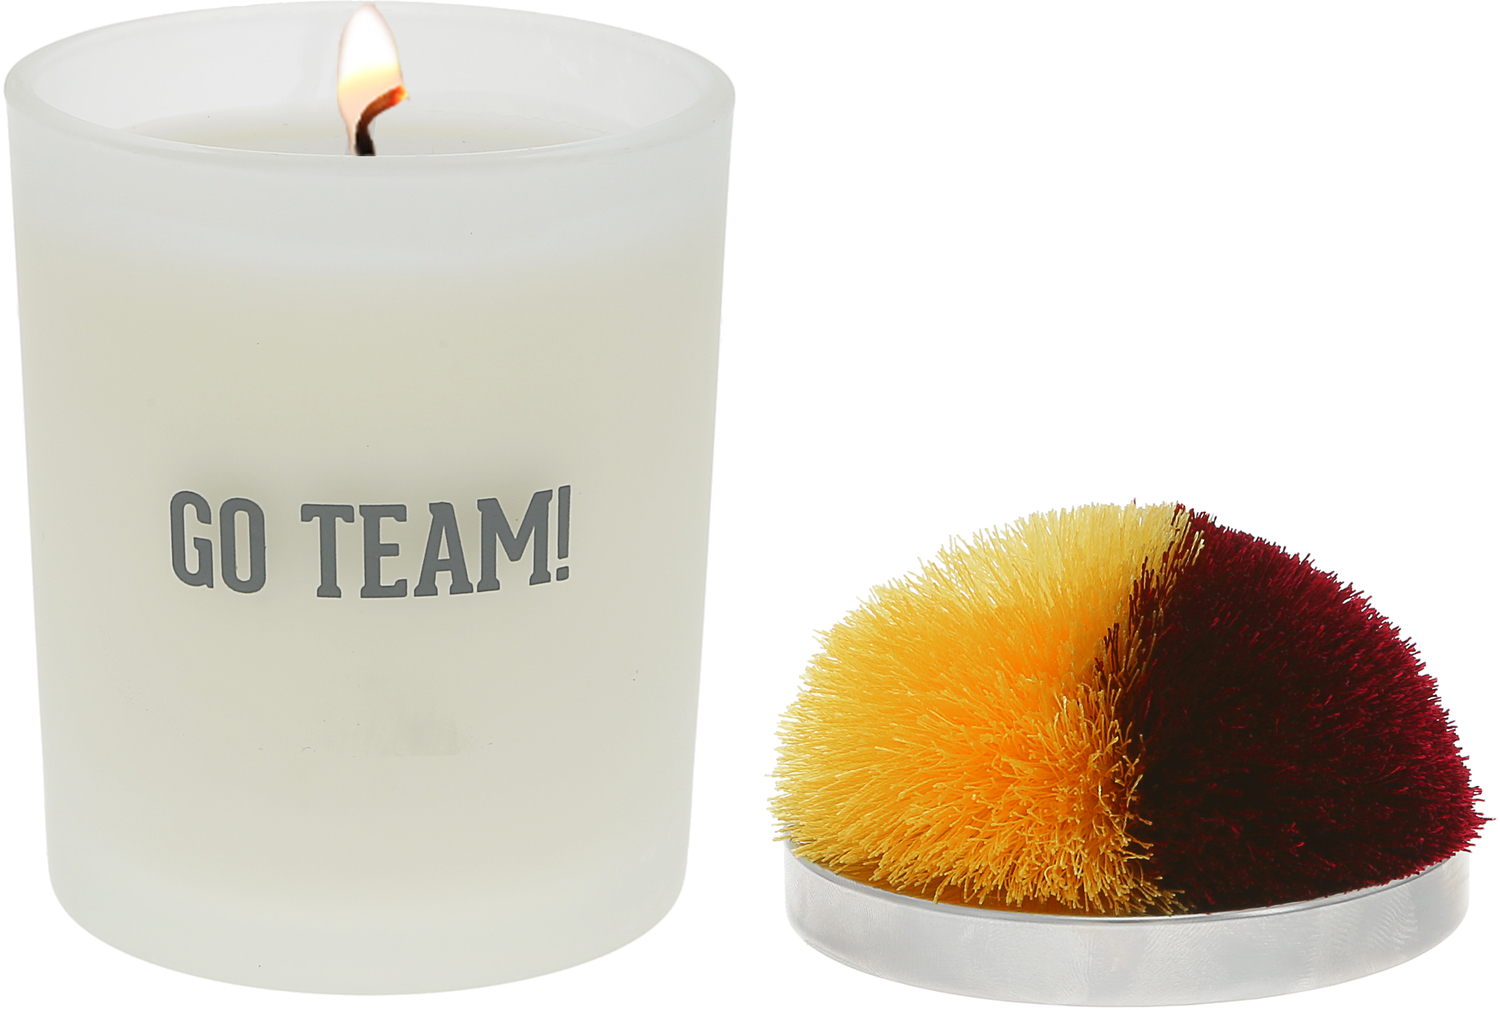 Go Team! - Maroon & Yellow by Repre-Scent - Go Team! - Maroon & Yellow - 5.5 oz - 100% Soy Wax Candle with Pom Pom Lid
Scent: Tranquility